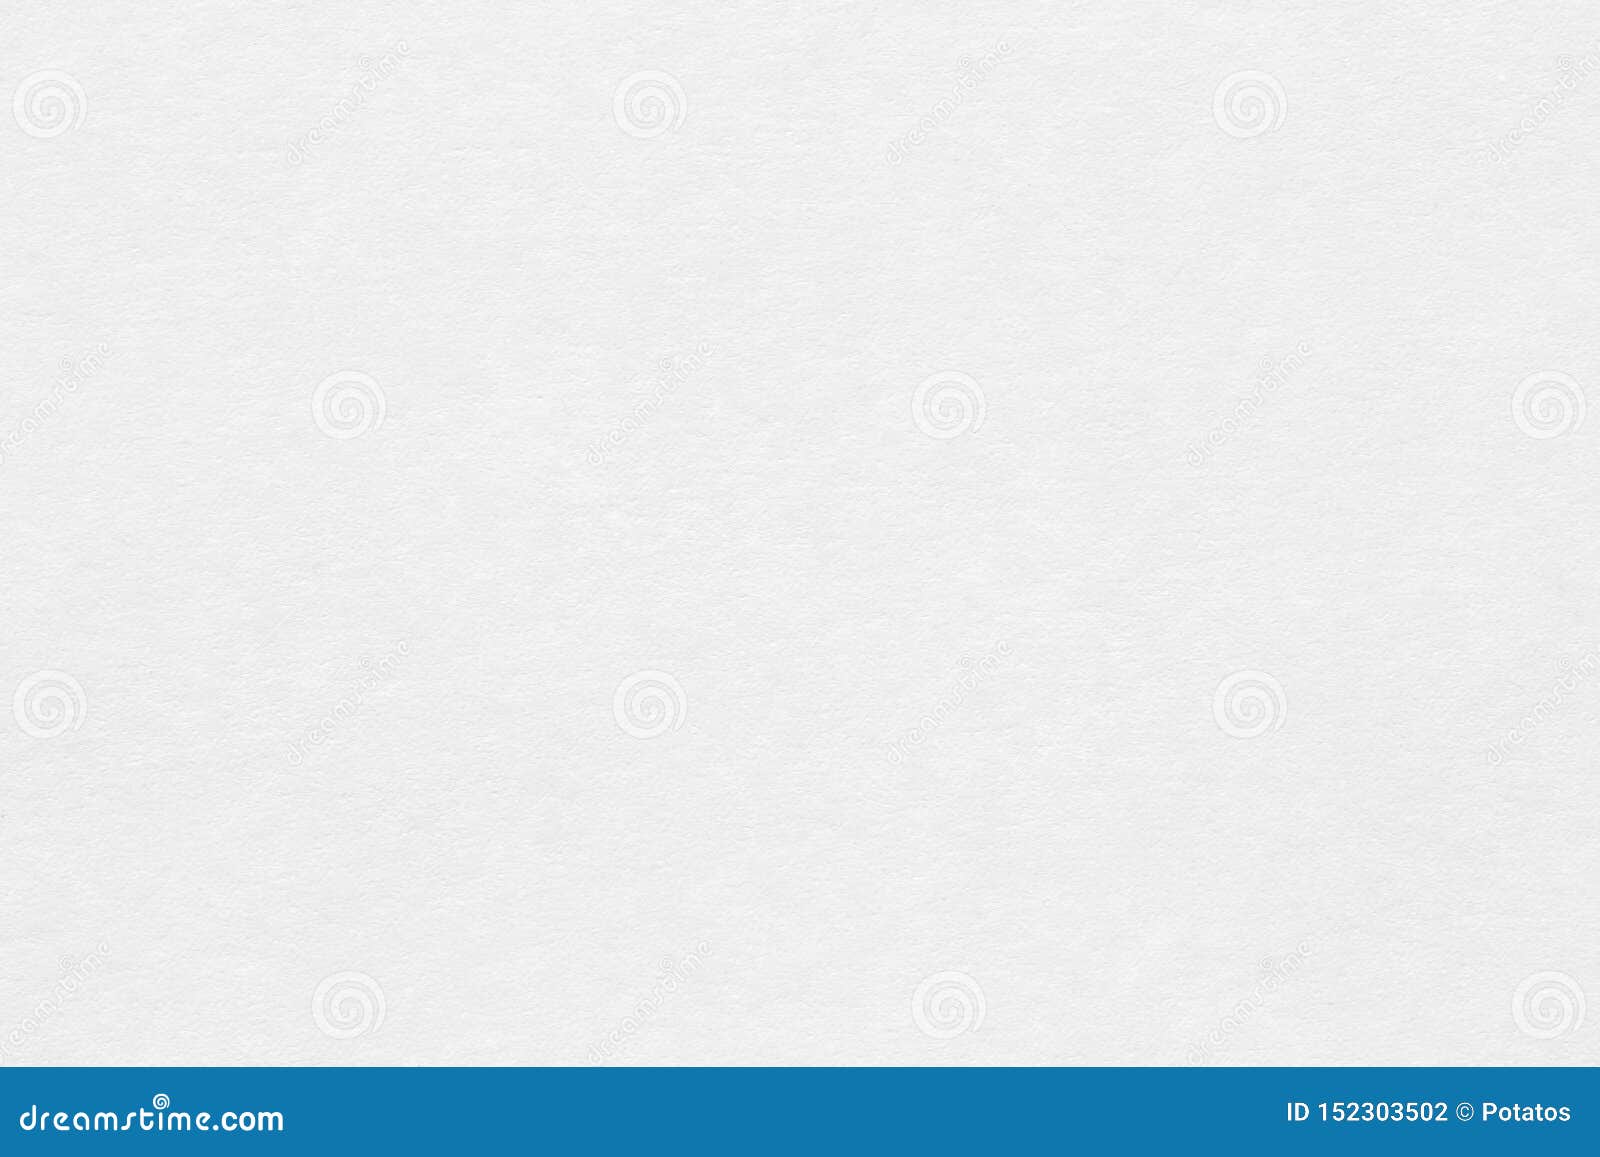 white paper texture background. craft paper sheet surface